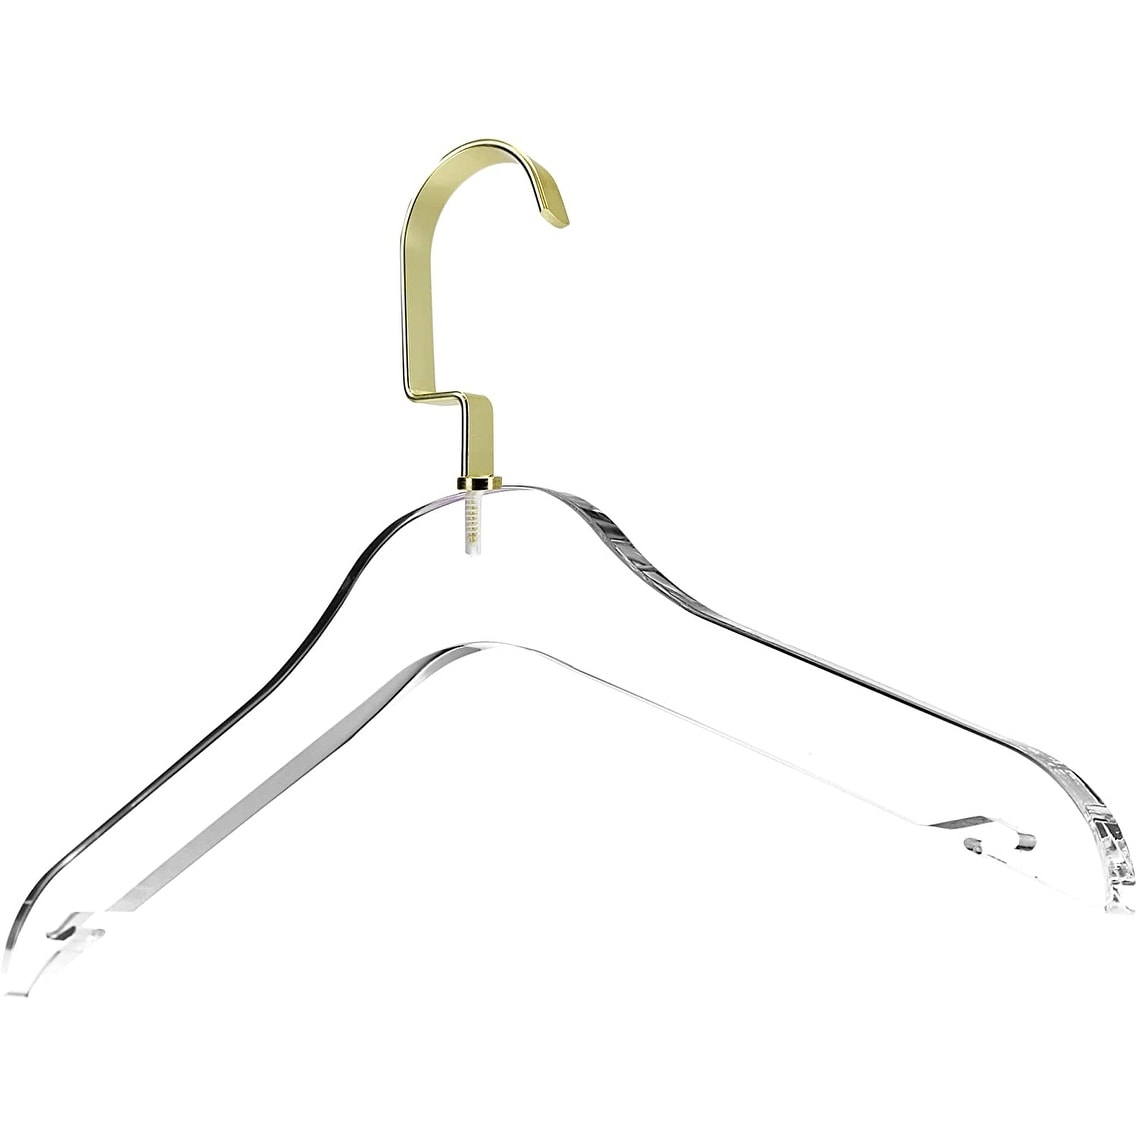 https://ak1.ostkcdn.com/images/products/is/images/direct/e0c089400791a20fc5420146c658b4d6878c747b/DesignStyles-Clear-Acrylic-Clothes-Hangers---10-Pk.jpg